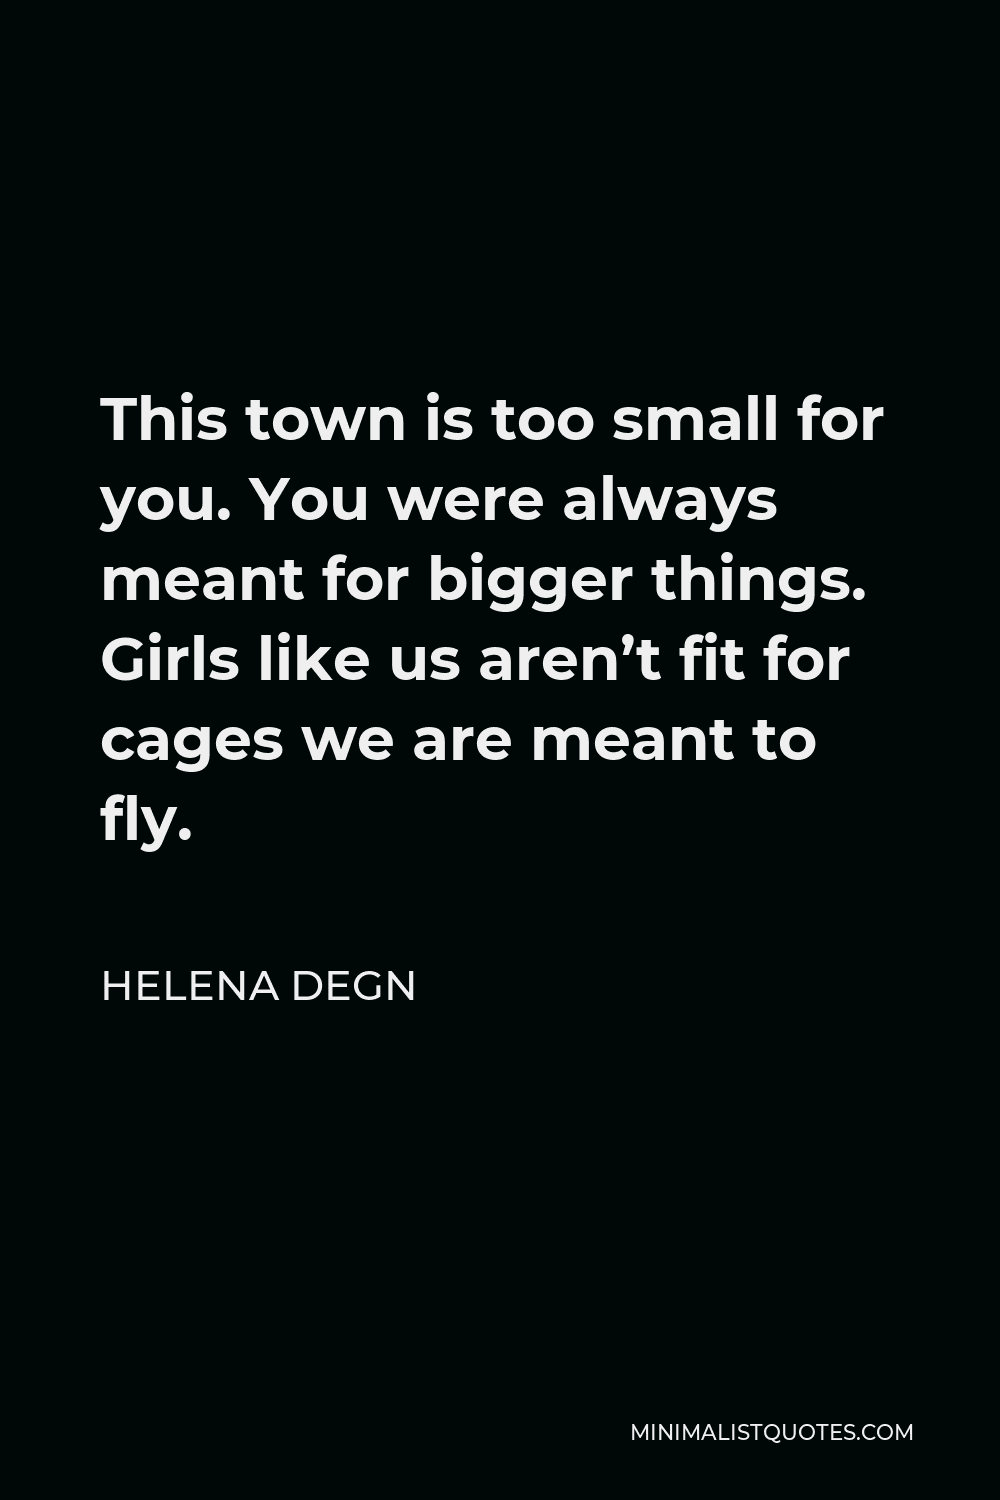 Helena Degn Quote - This town is too small for you. You were always meant for bigger things. Girls like us aren’t fit for cages we are meant to fly.